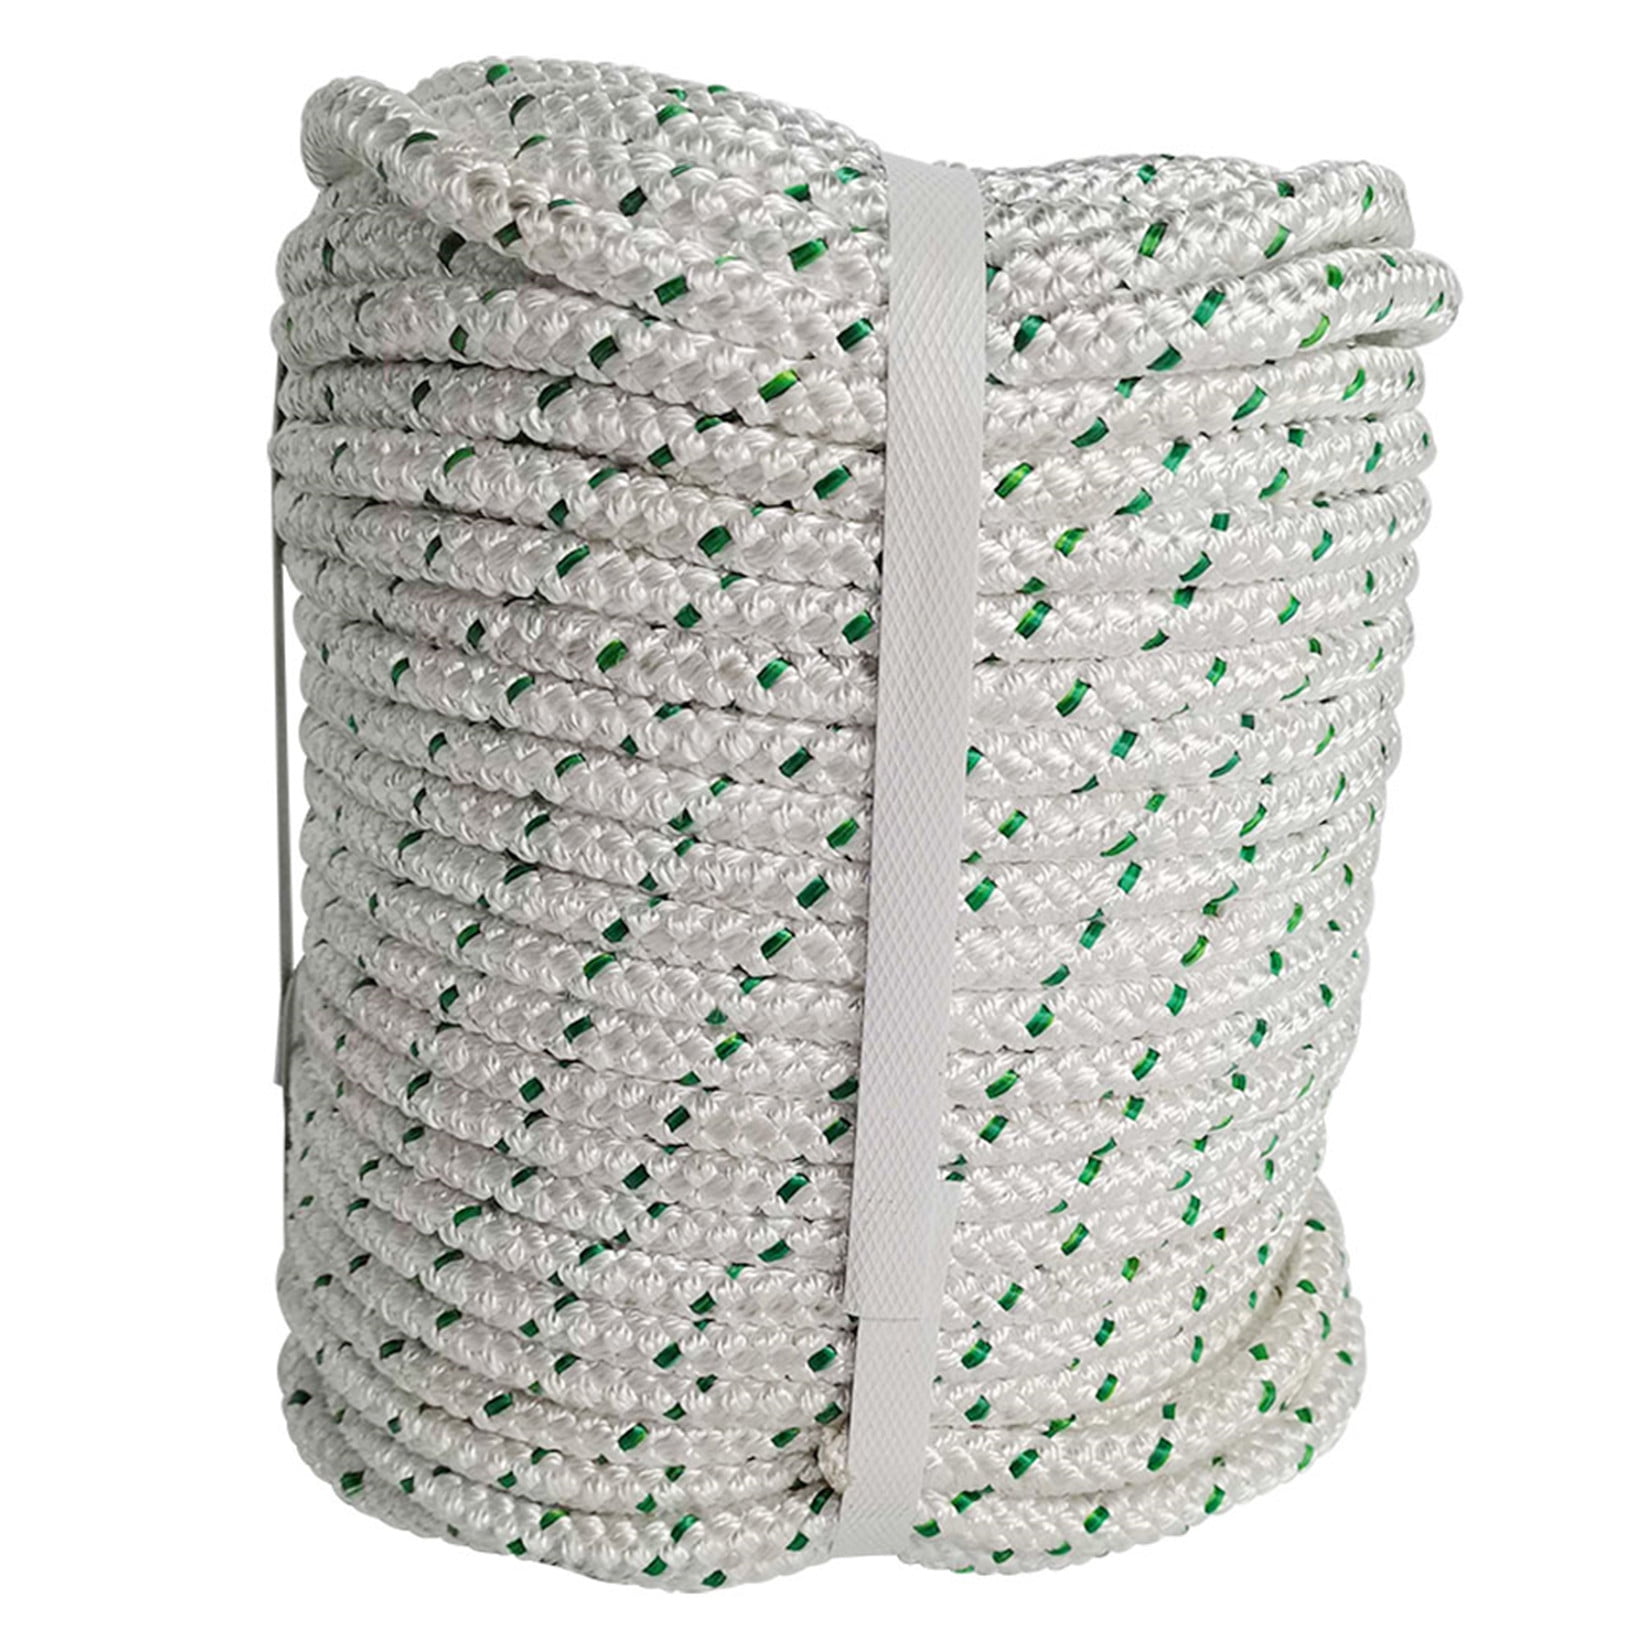 GOLBERG Twisted 100% Natural Cotton Rope 5/32 3/4 White Cotton Rope 3/8 3/16 5/8 1 1/4 1 1/2 Several Lengths to Choose 3/16 7/32 1/4 5/16 3/8 1/2 5/8 3/4 1 1 1/4 GOLBERG G 7/32 1/2 5/16 1 1/4 